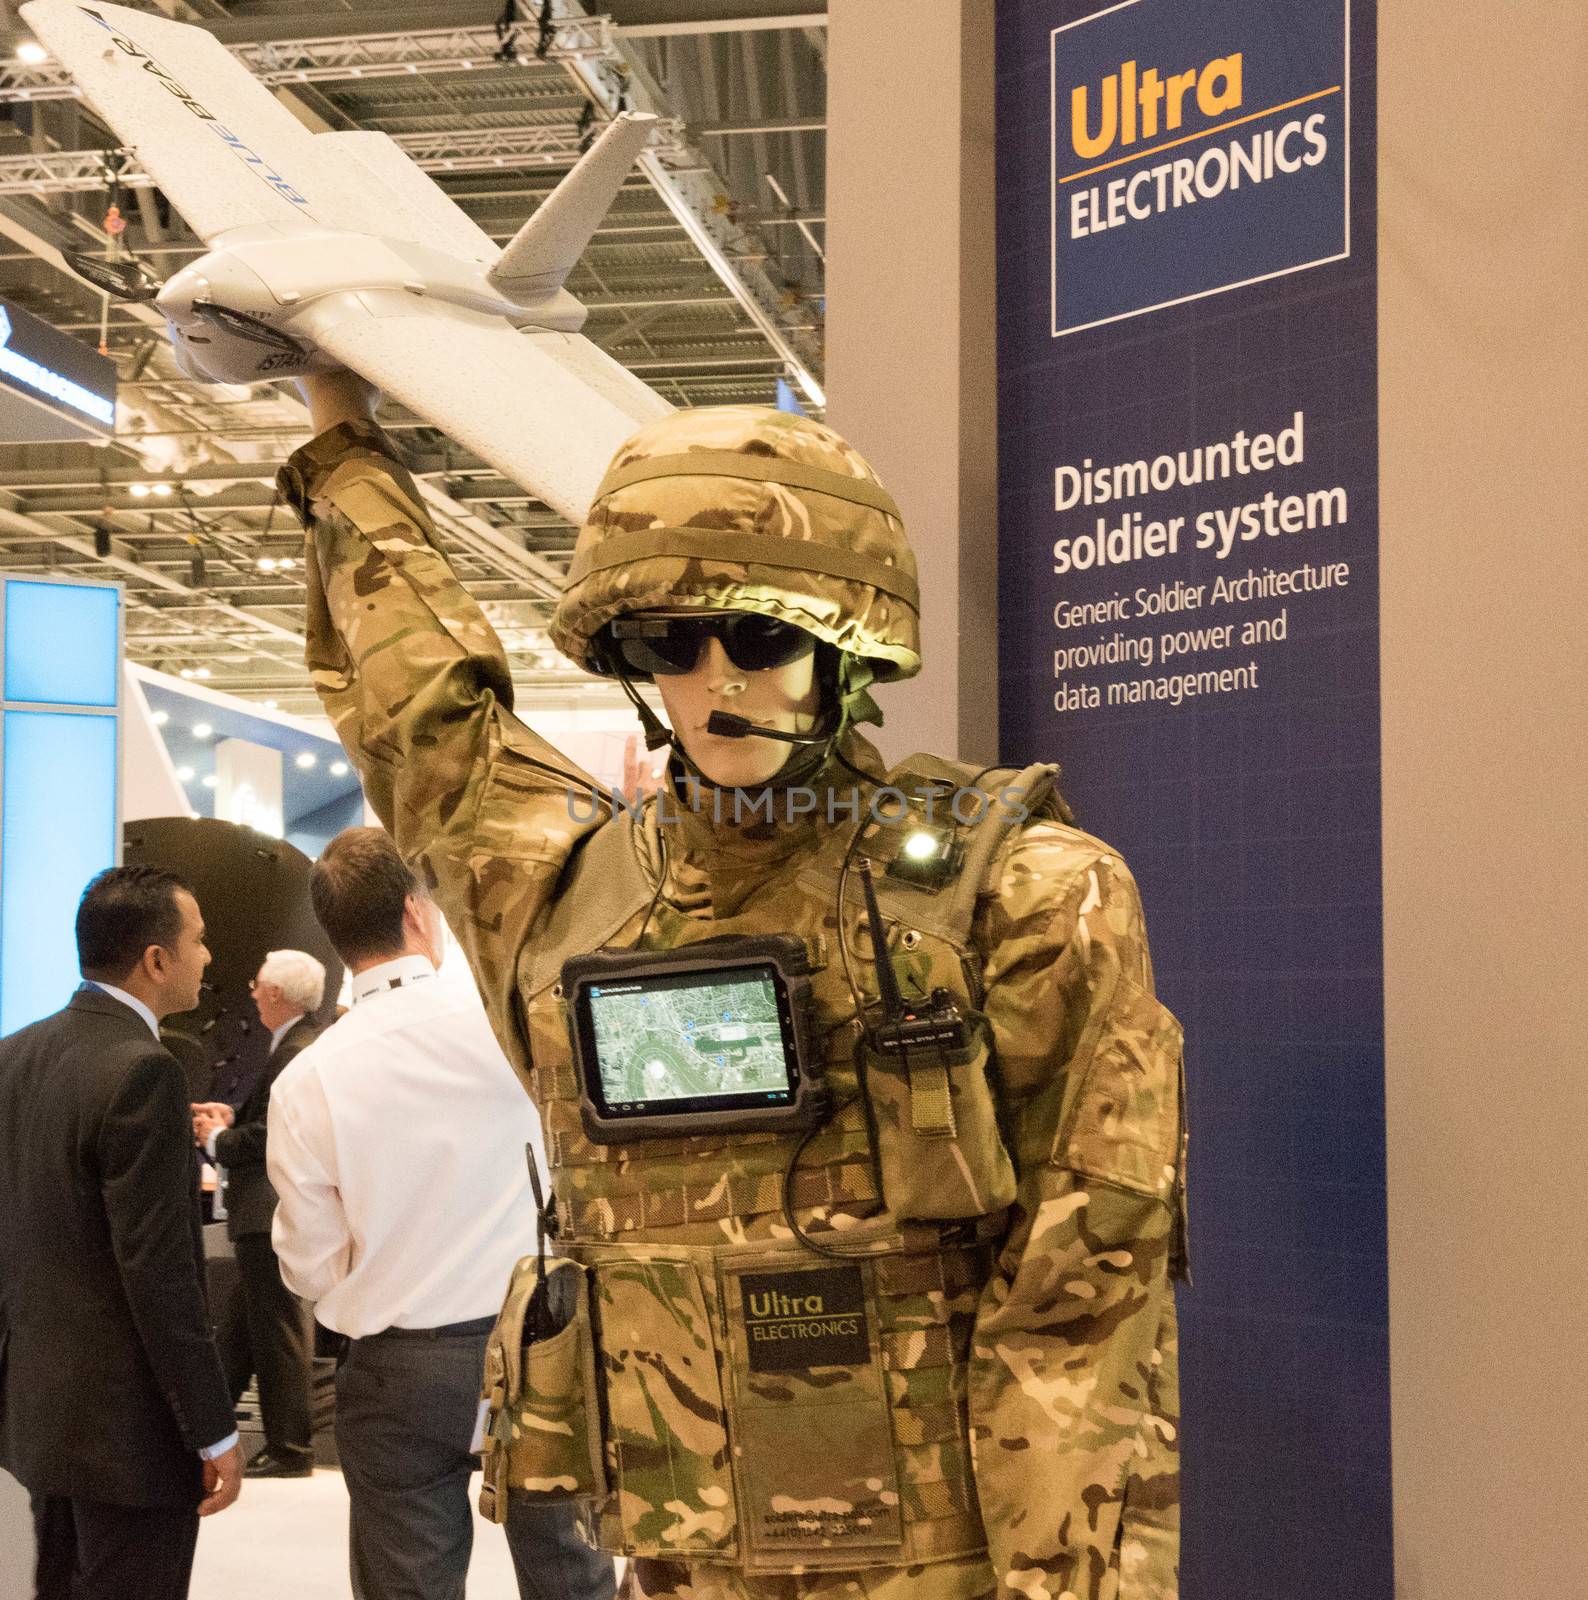 UNITED KINGDOM, London: Future soldier and drone	The Defence and Security International Exhibition (DSEI) began in London on September 15, 2015 despite a week of direct action protests by peace campaigners.  	The arms fair has seen over 30,000 people descend on London to see the 1,500 exhibitors who are displaying weapons of war from pistols and rifles up to tanks, assault helicopters and warships.  	Protesters attempted to block the main road into the exhibition, claiming that such an event strengthened the UK's ties to human rights abuses. 